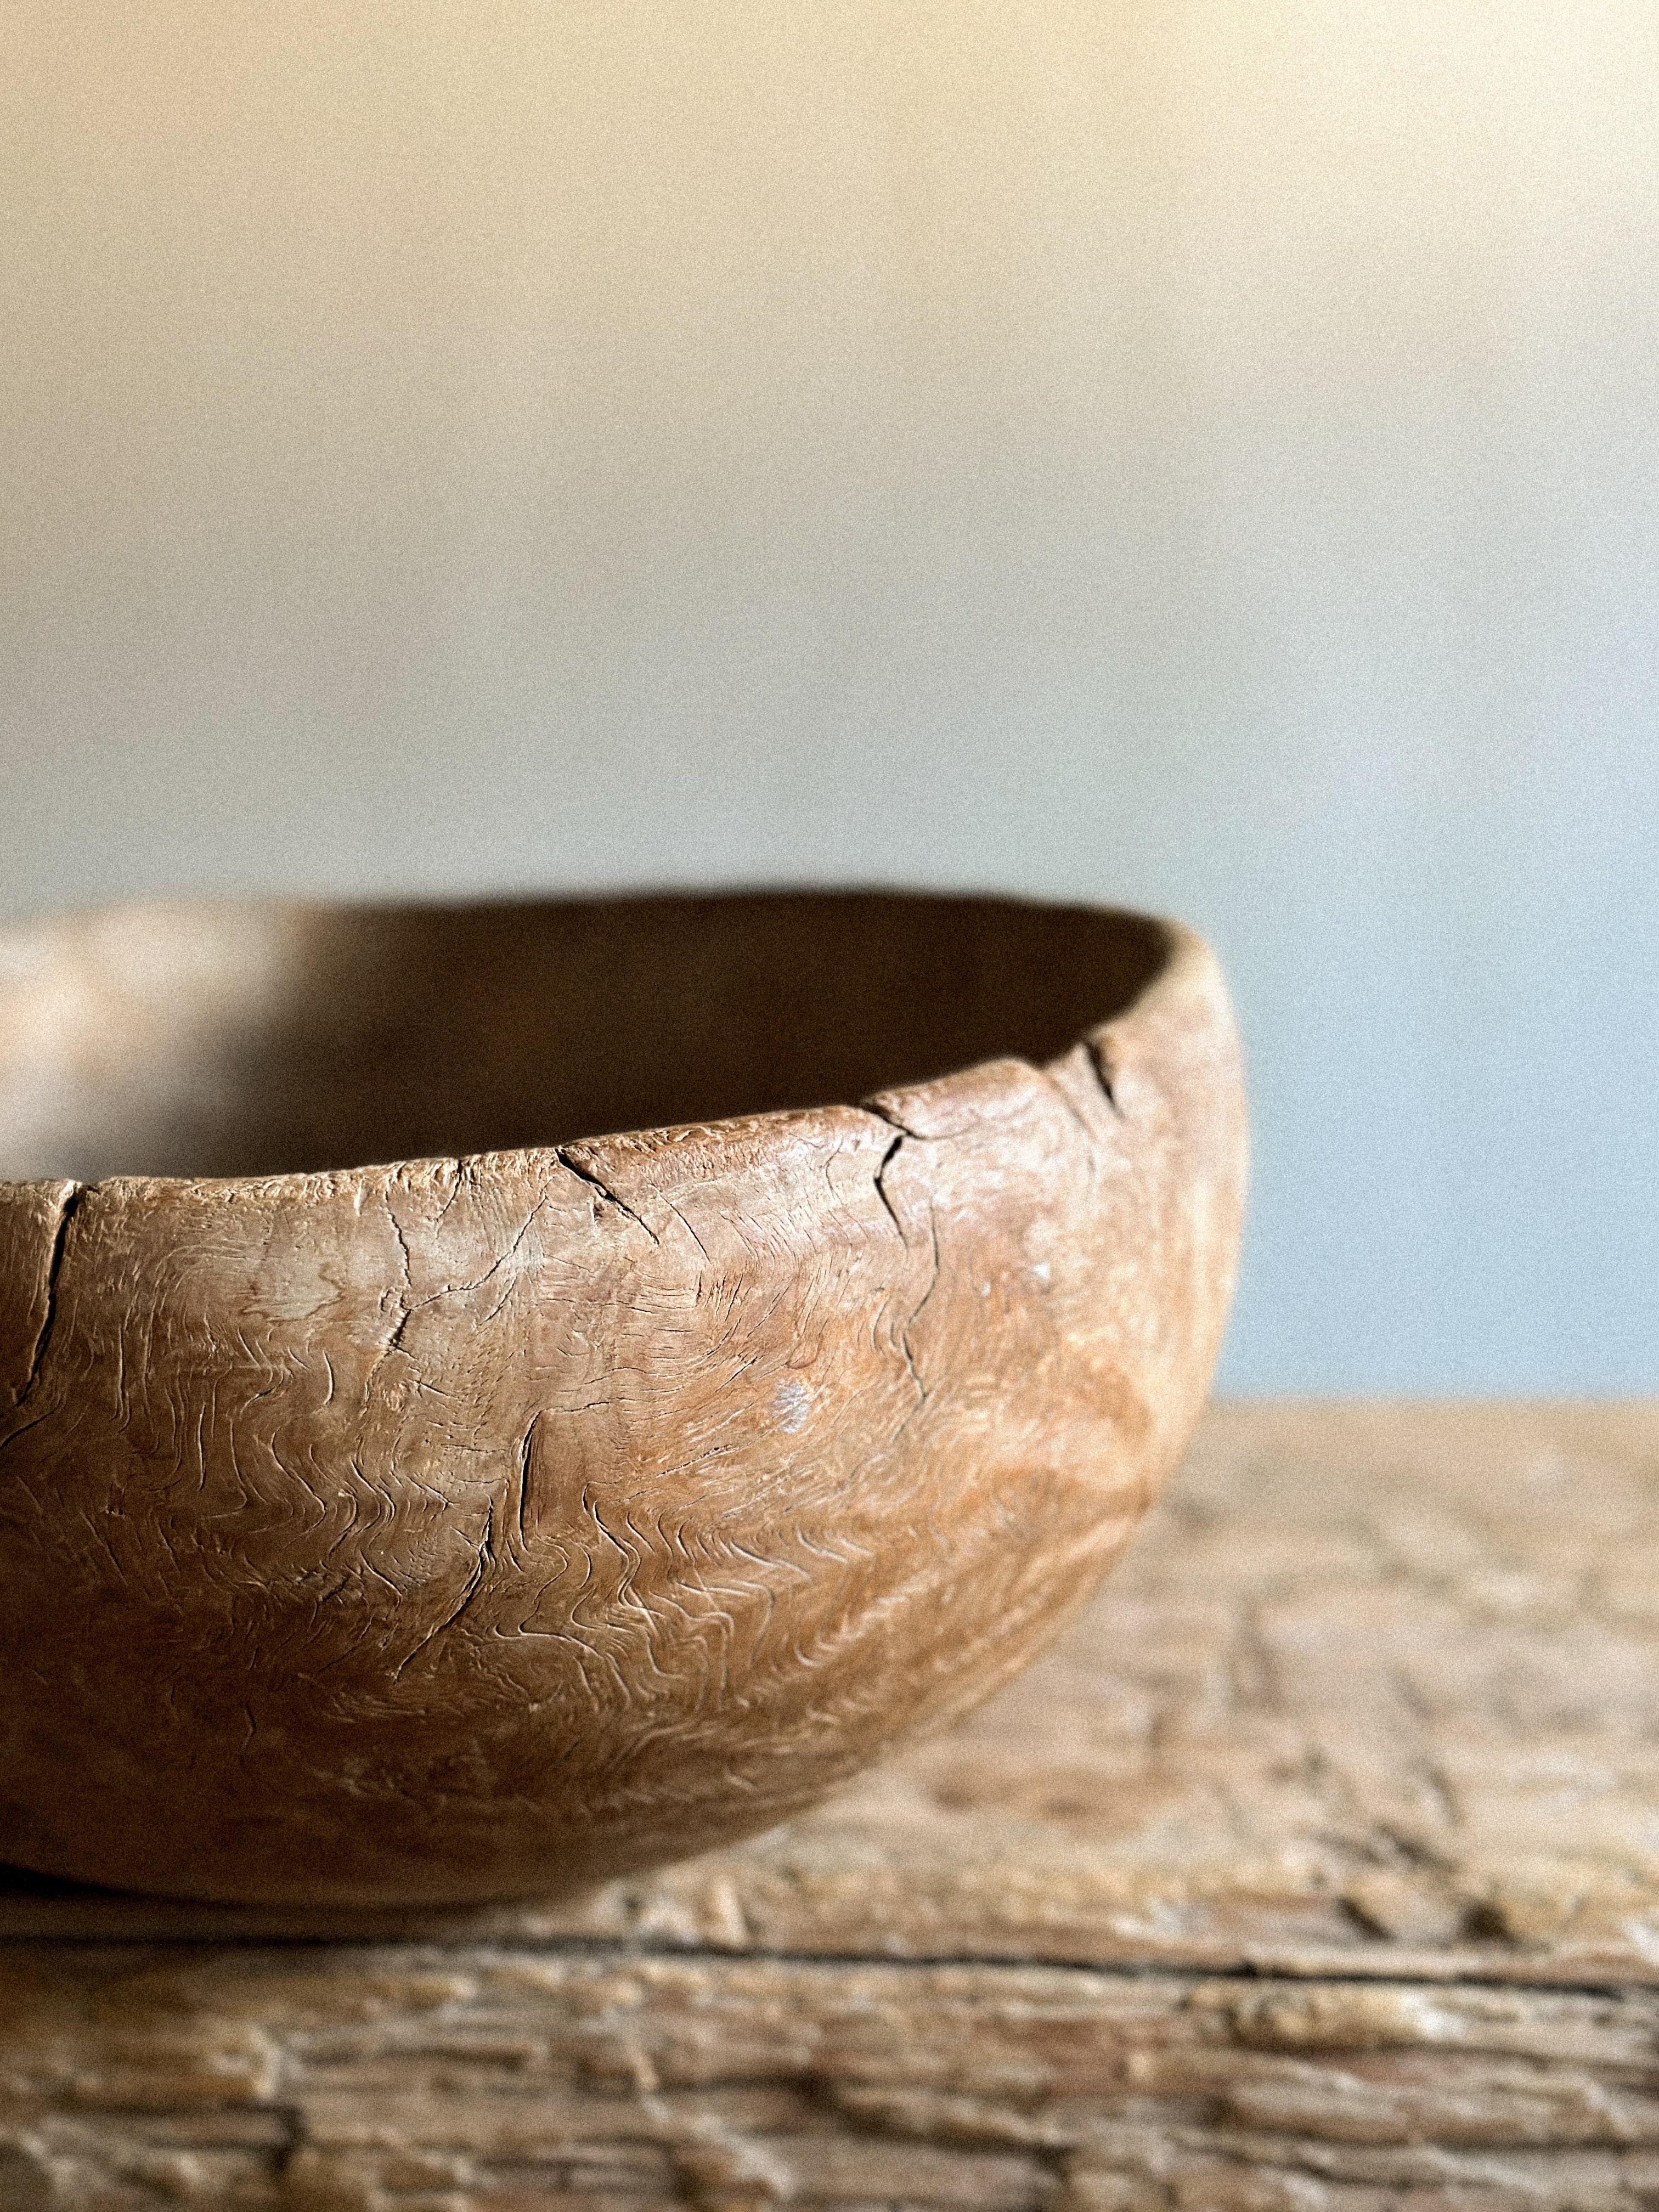 Antique Root Bowl, Wabi Sabi Style, Scandinavia 1800s In Good Condition For Sale In Hønefoss, 30